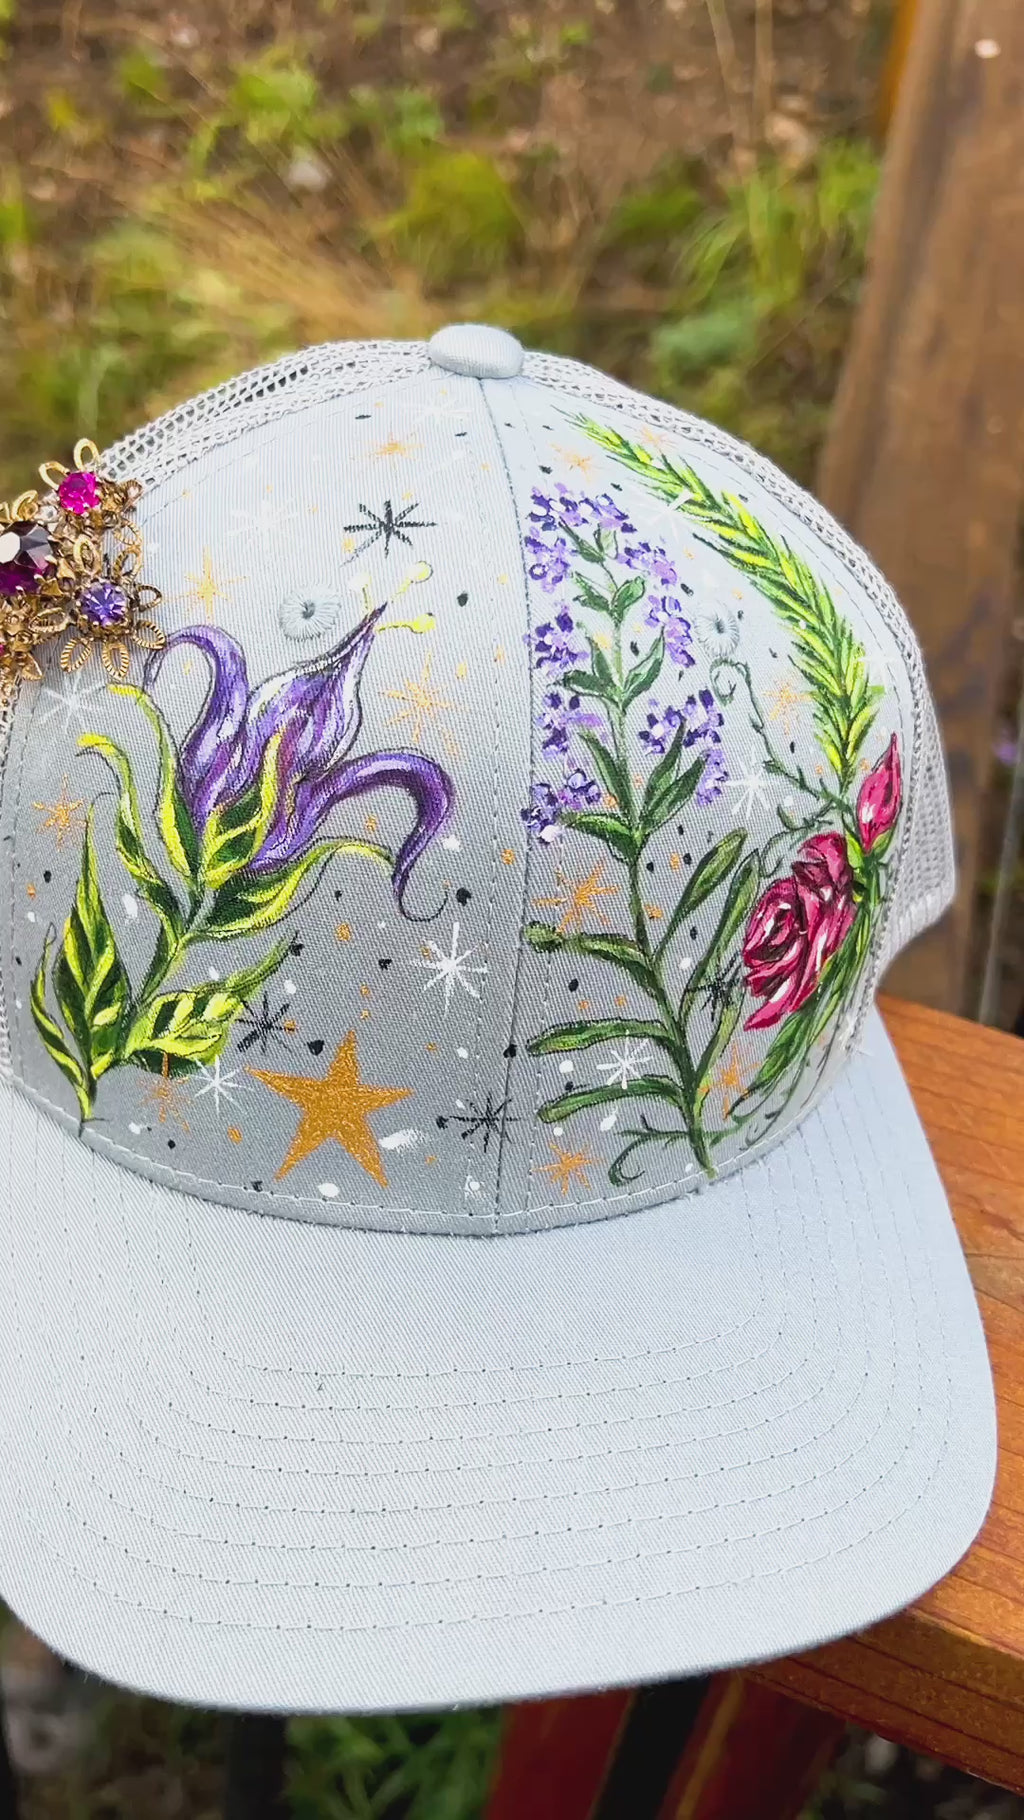 "Aunt Jet's Garden" hand painted gray truck hat.  Inspired by the book Practical Magic.  Hand Painted belladonna, rosemary, red roses, lavender with stars.  Accented with a vintage rhinestone brooch with deep purple and fuschia stones.